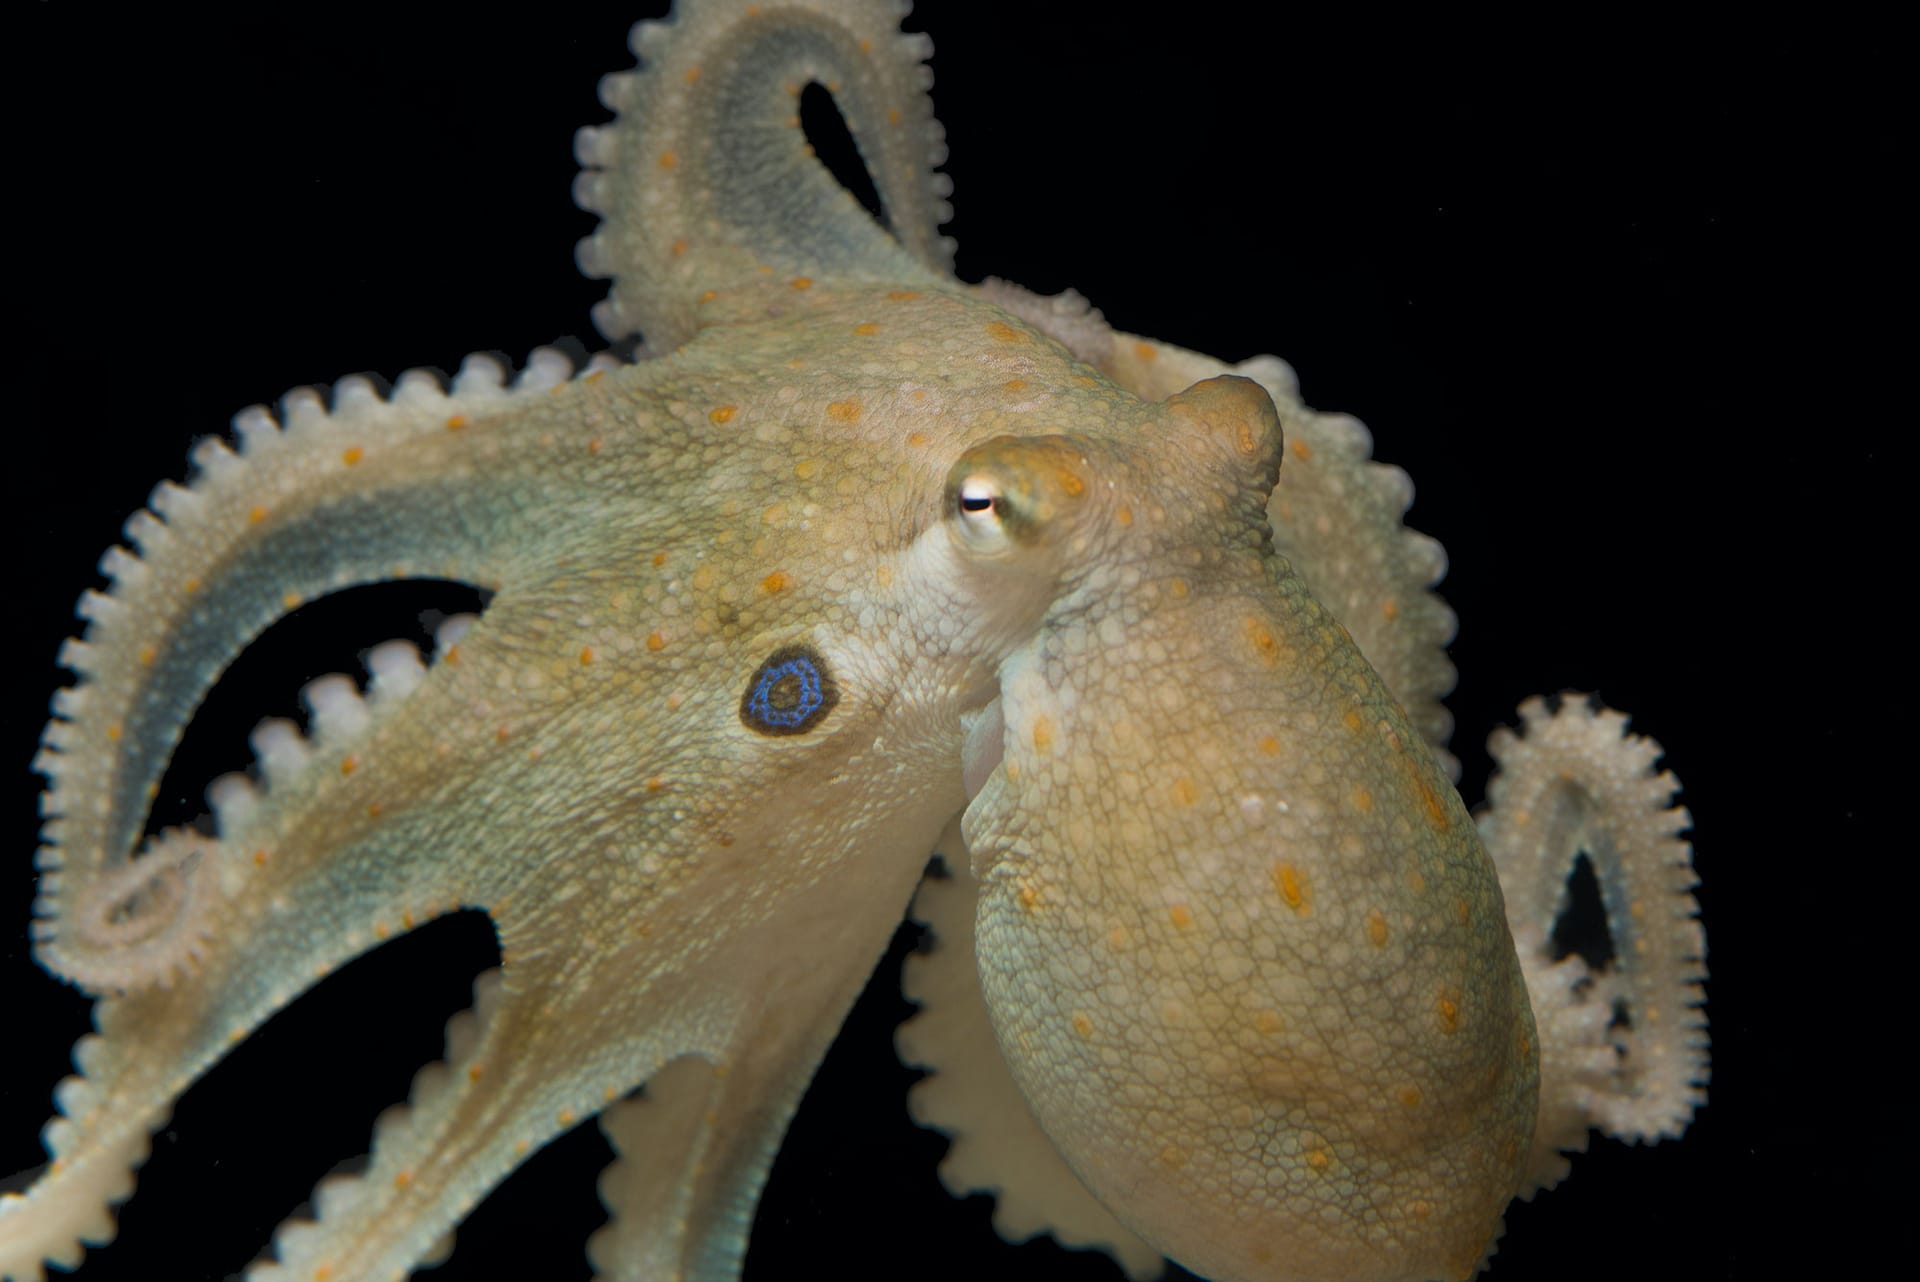 Image of an octopus used in Dr. Dolen's research